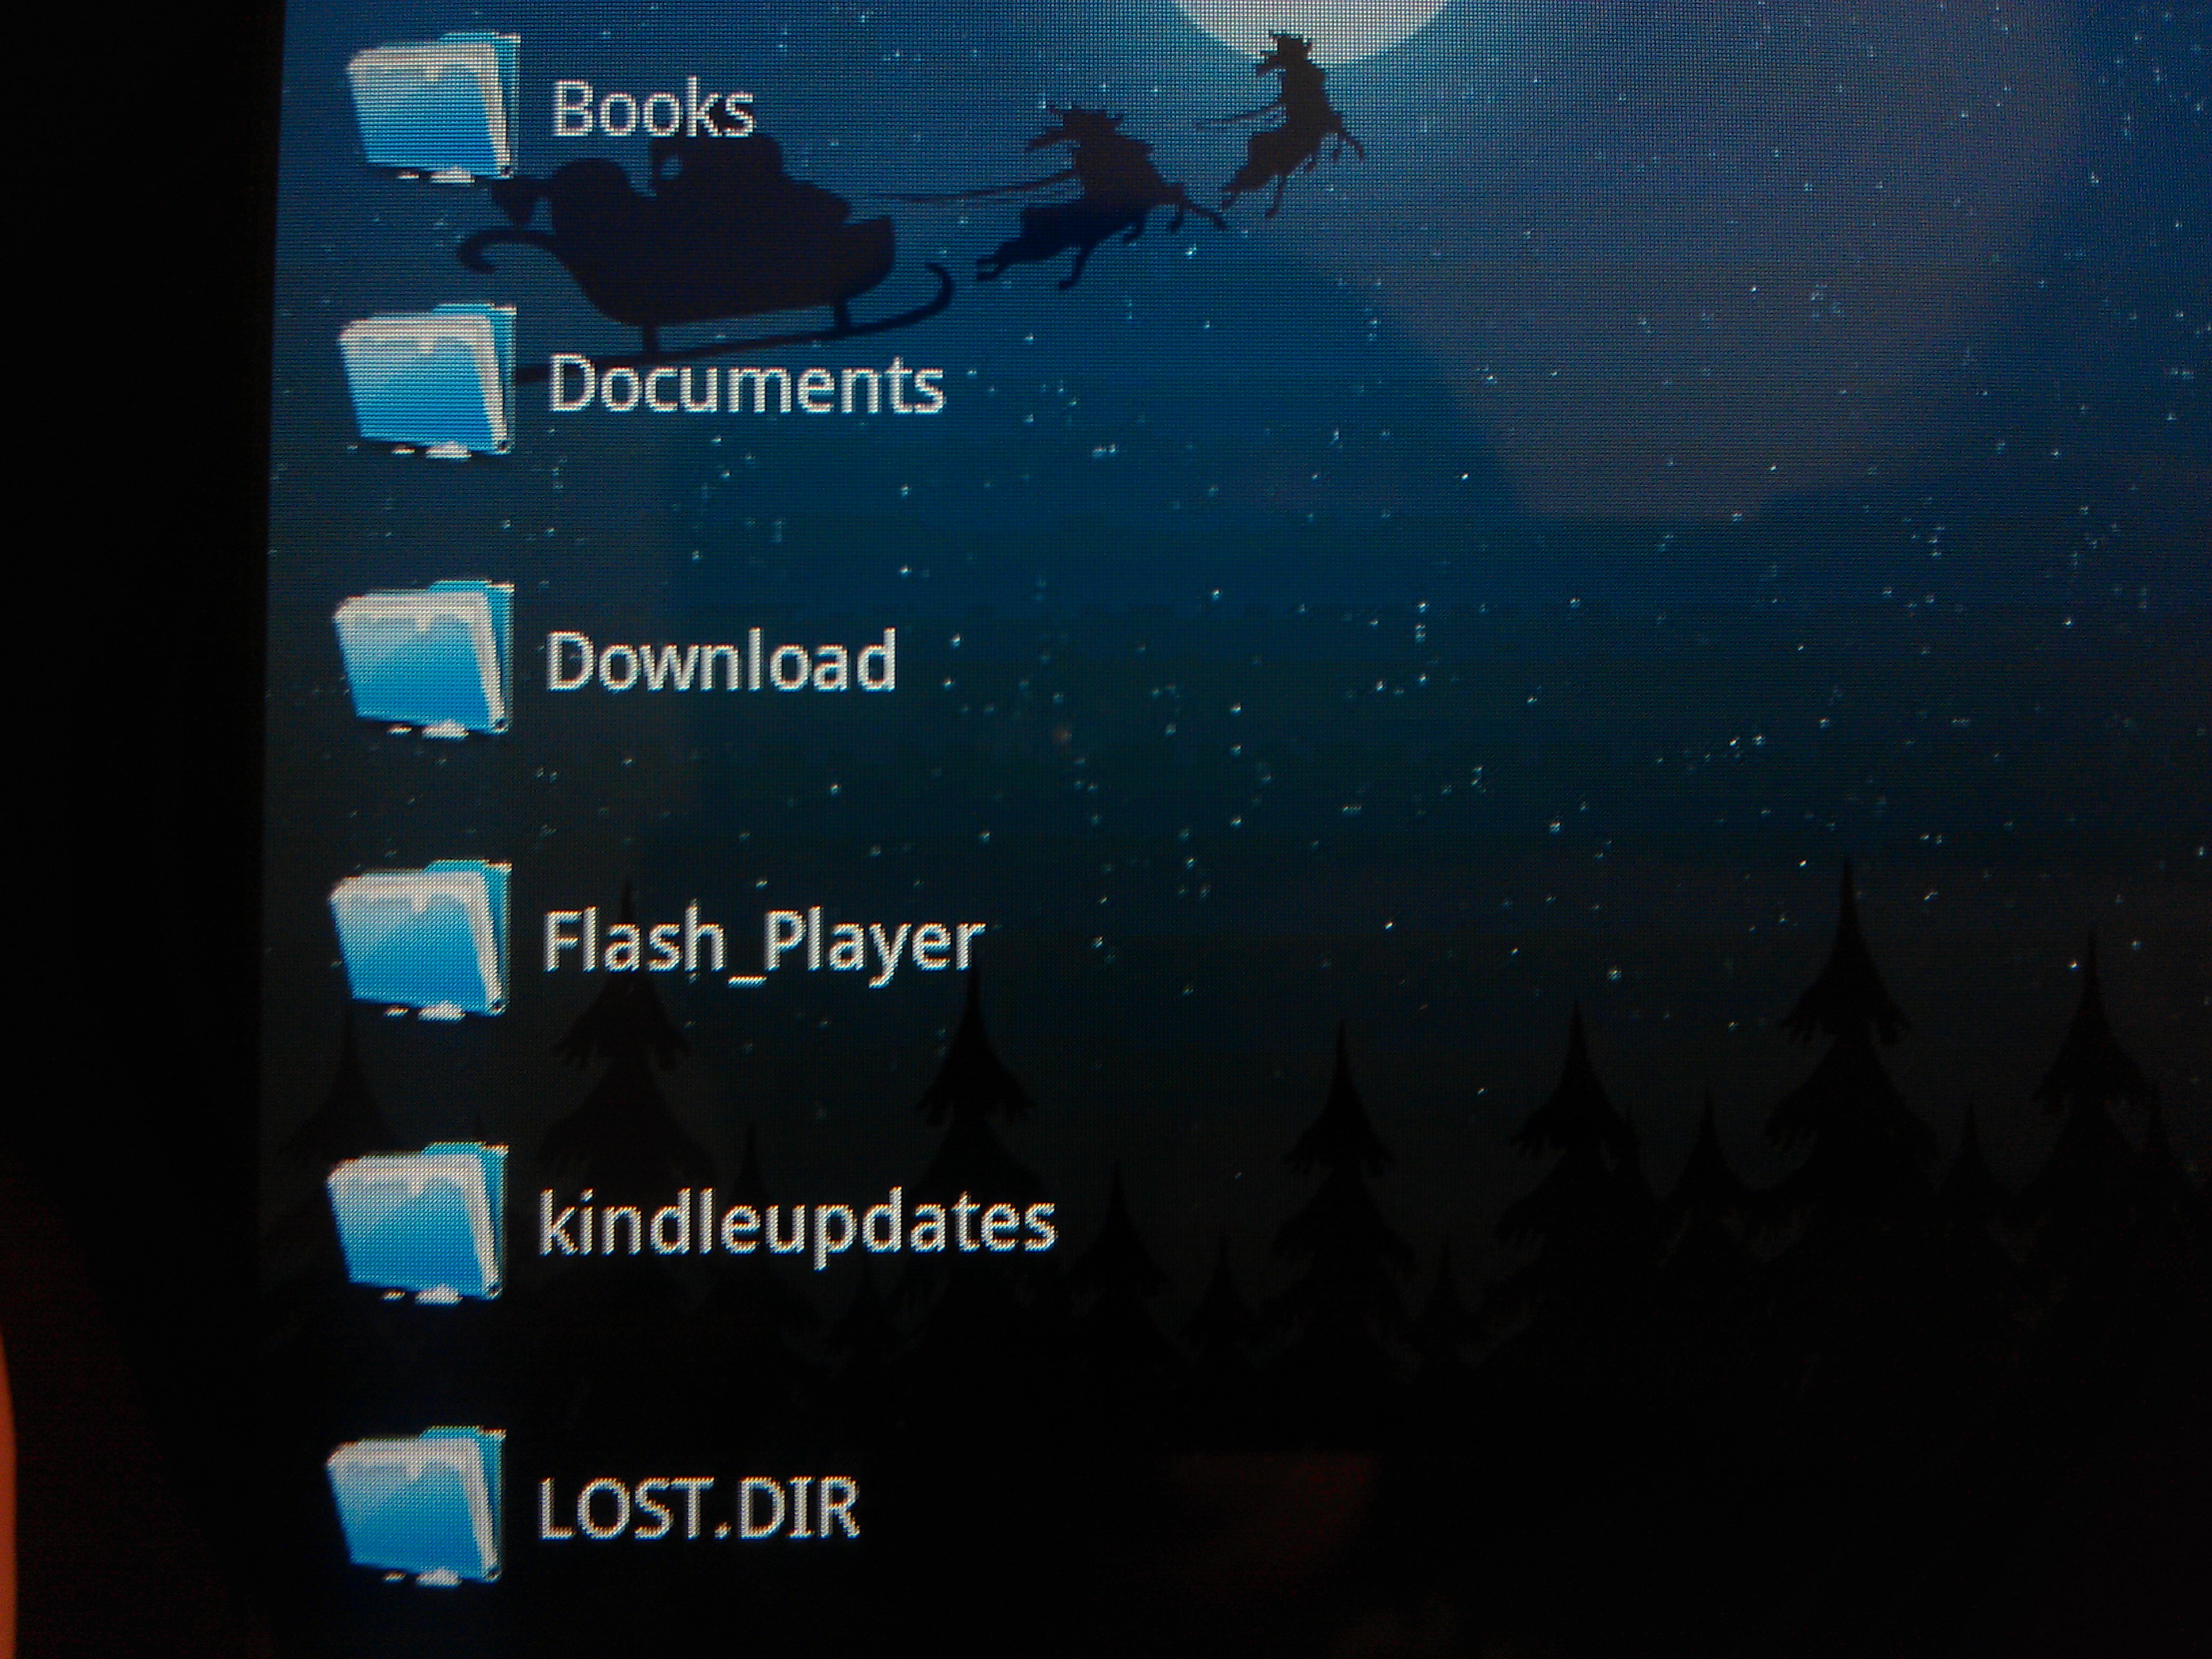 "Download" Folder on the Kindle Fire